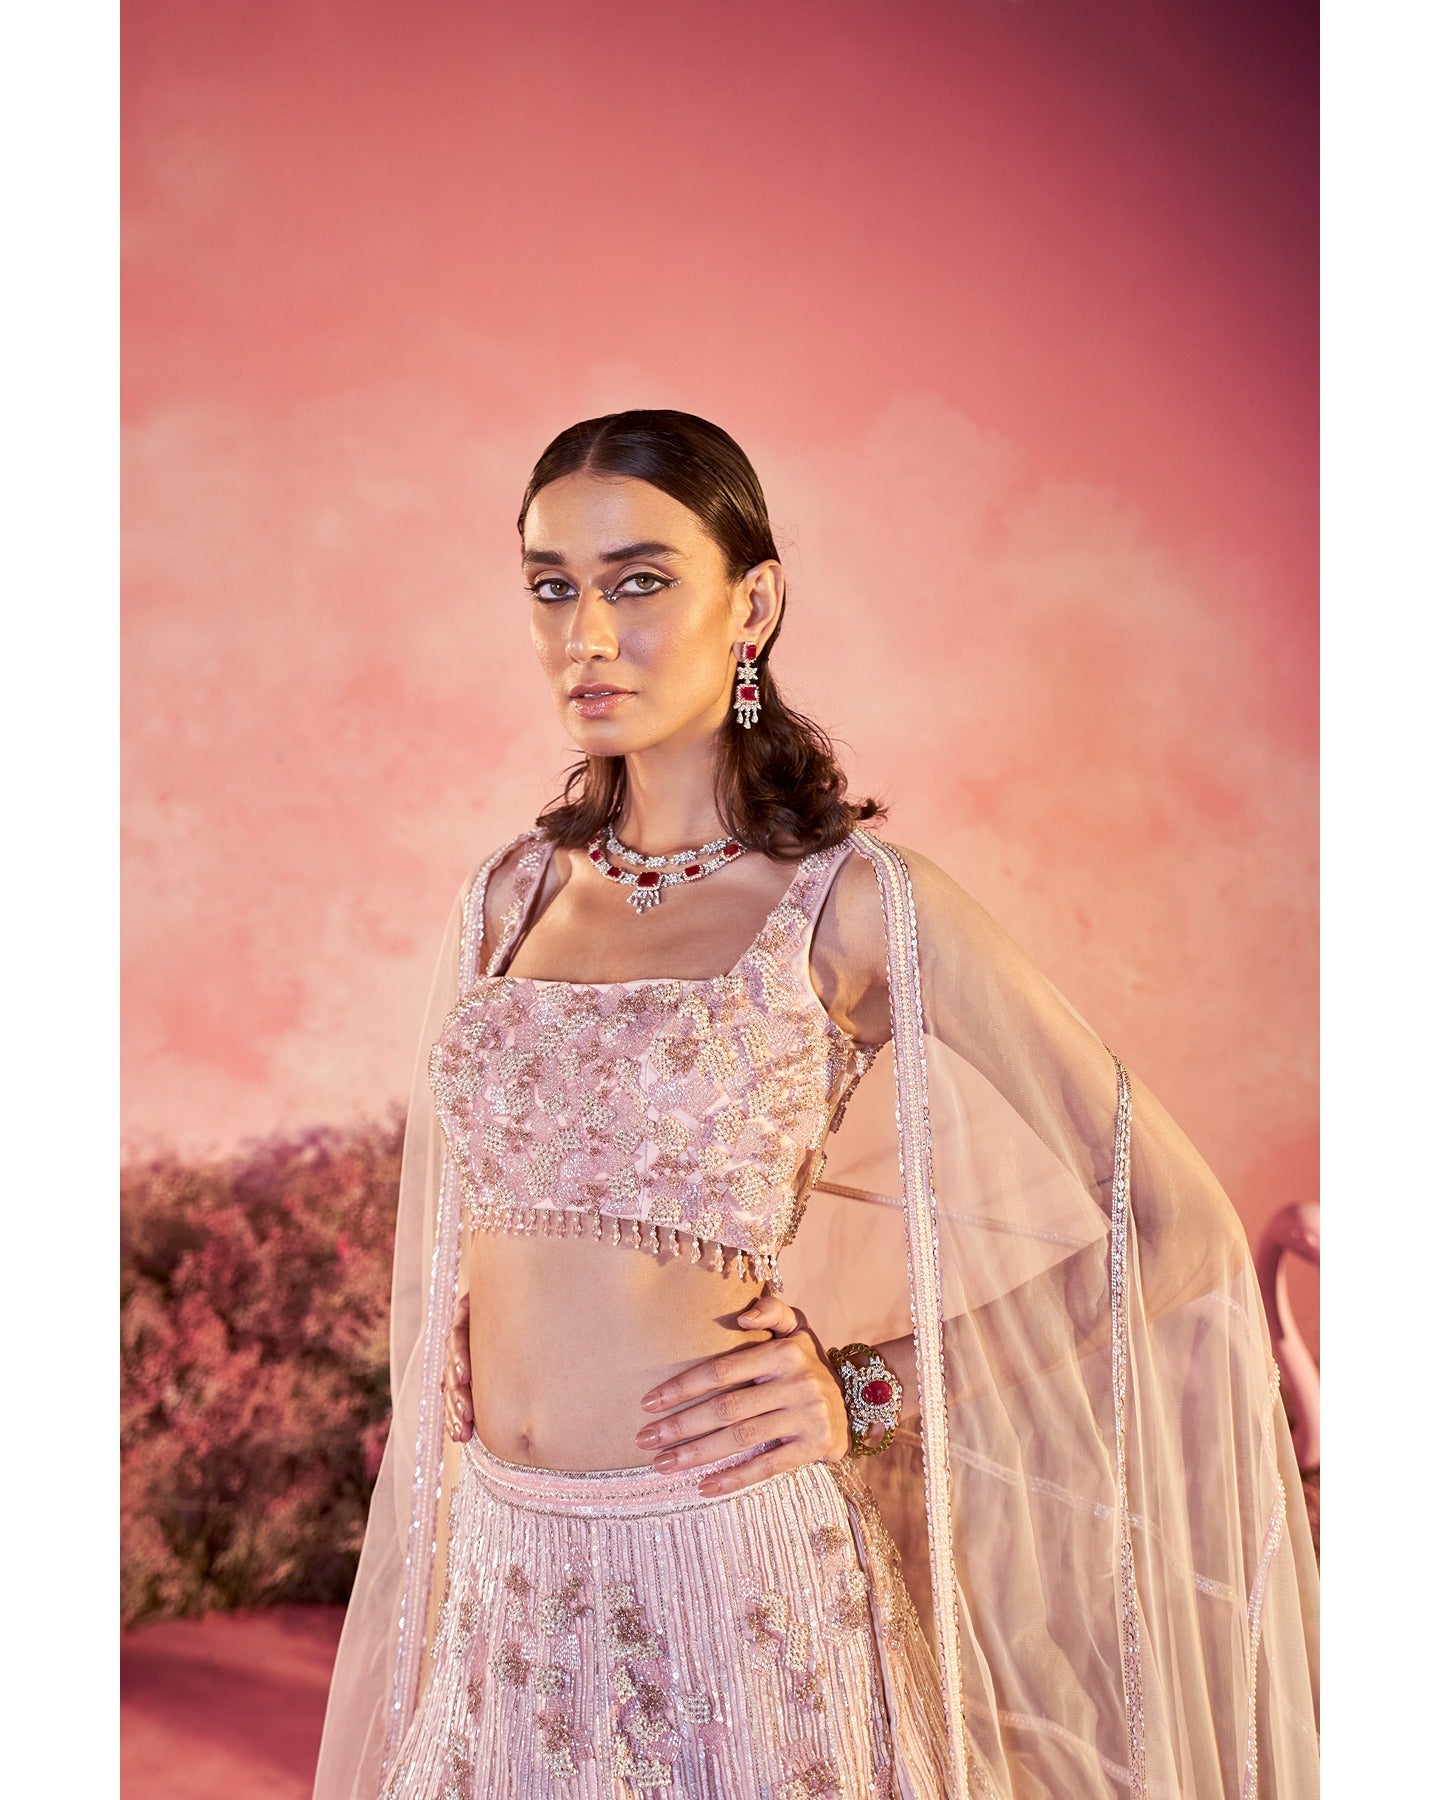 Dream in pink: Embracing the beauty of hand-embroidered details on this enchanting lehenga. 